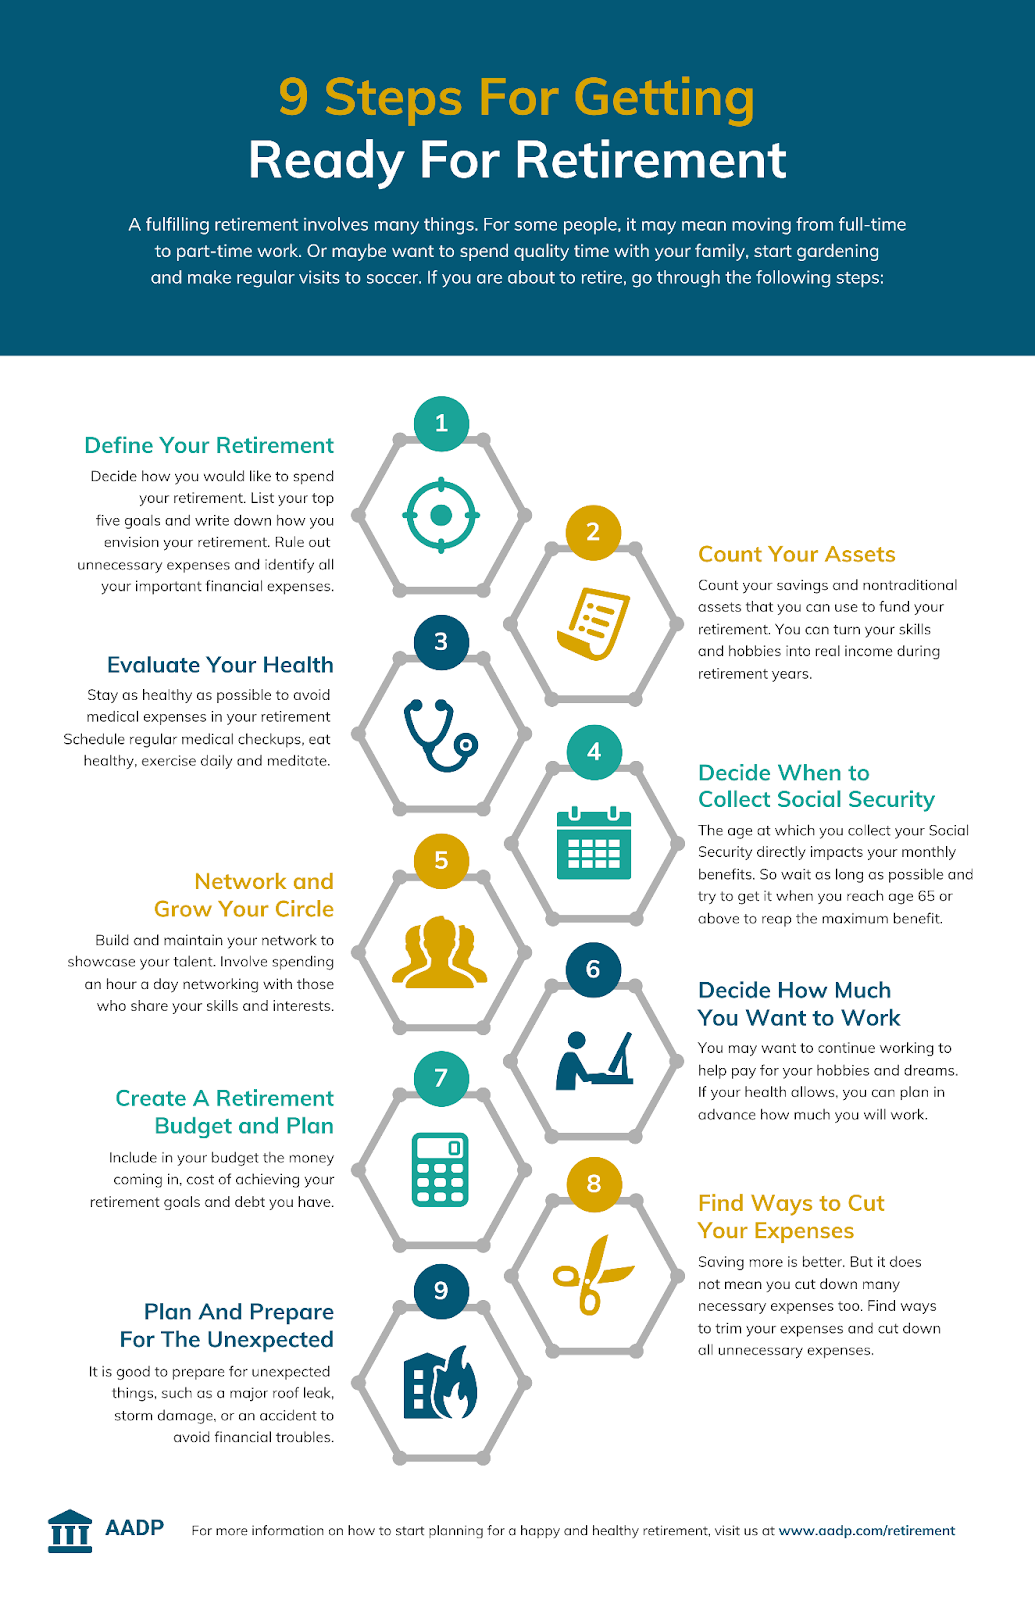 9 Steps to Prepare For Retirement Infographic